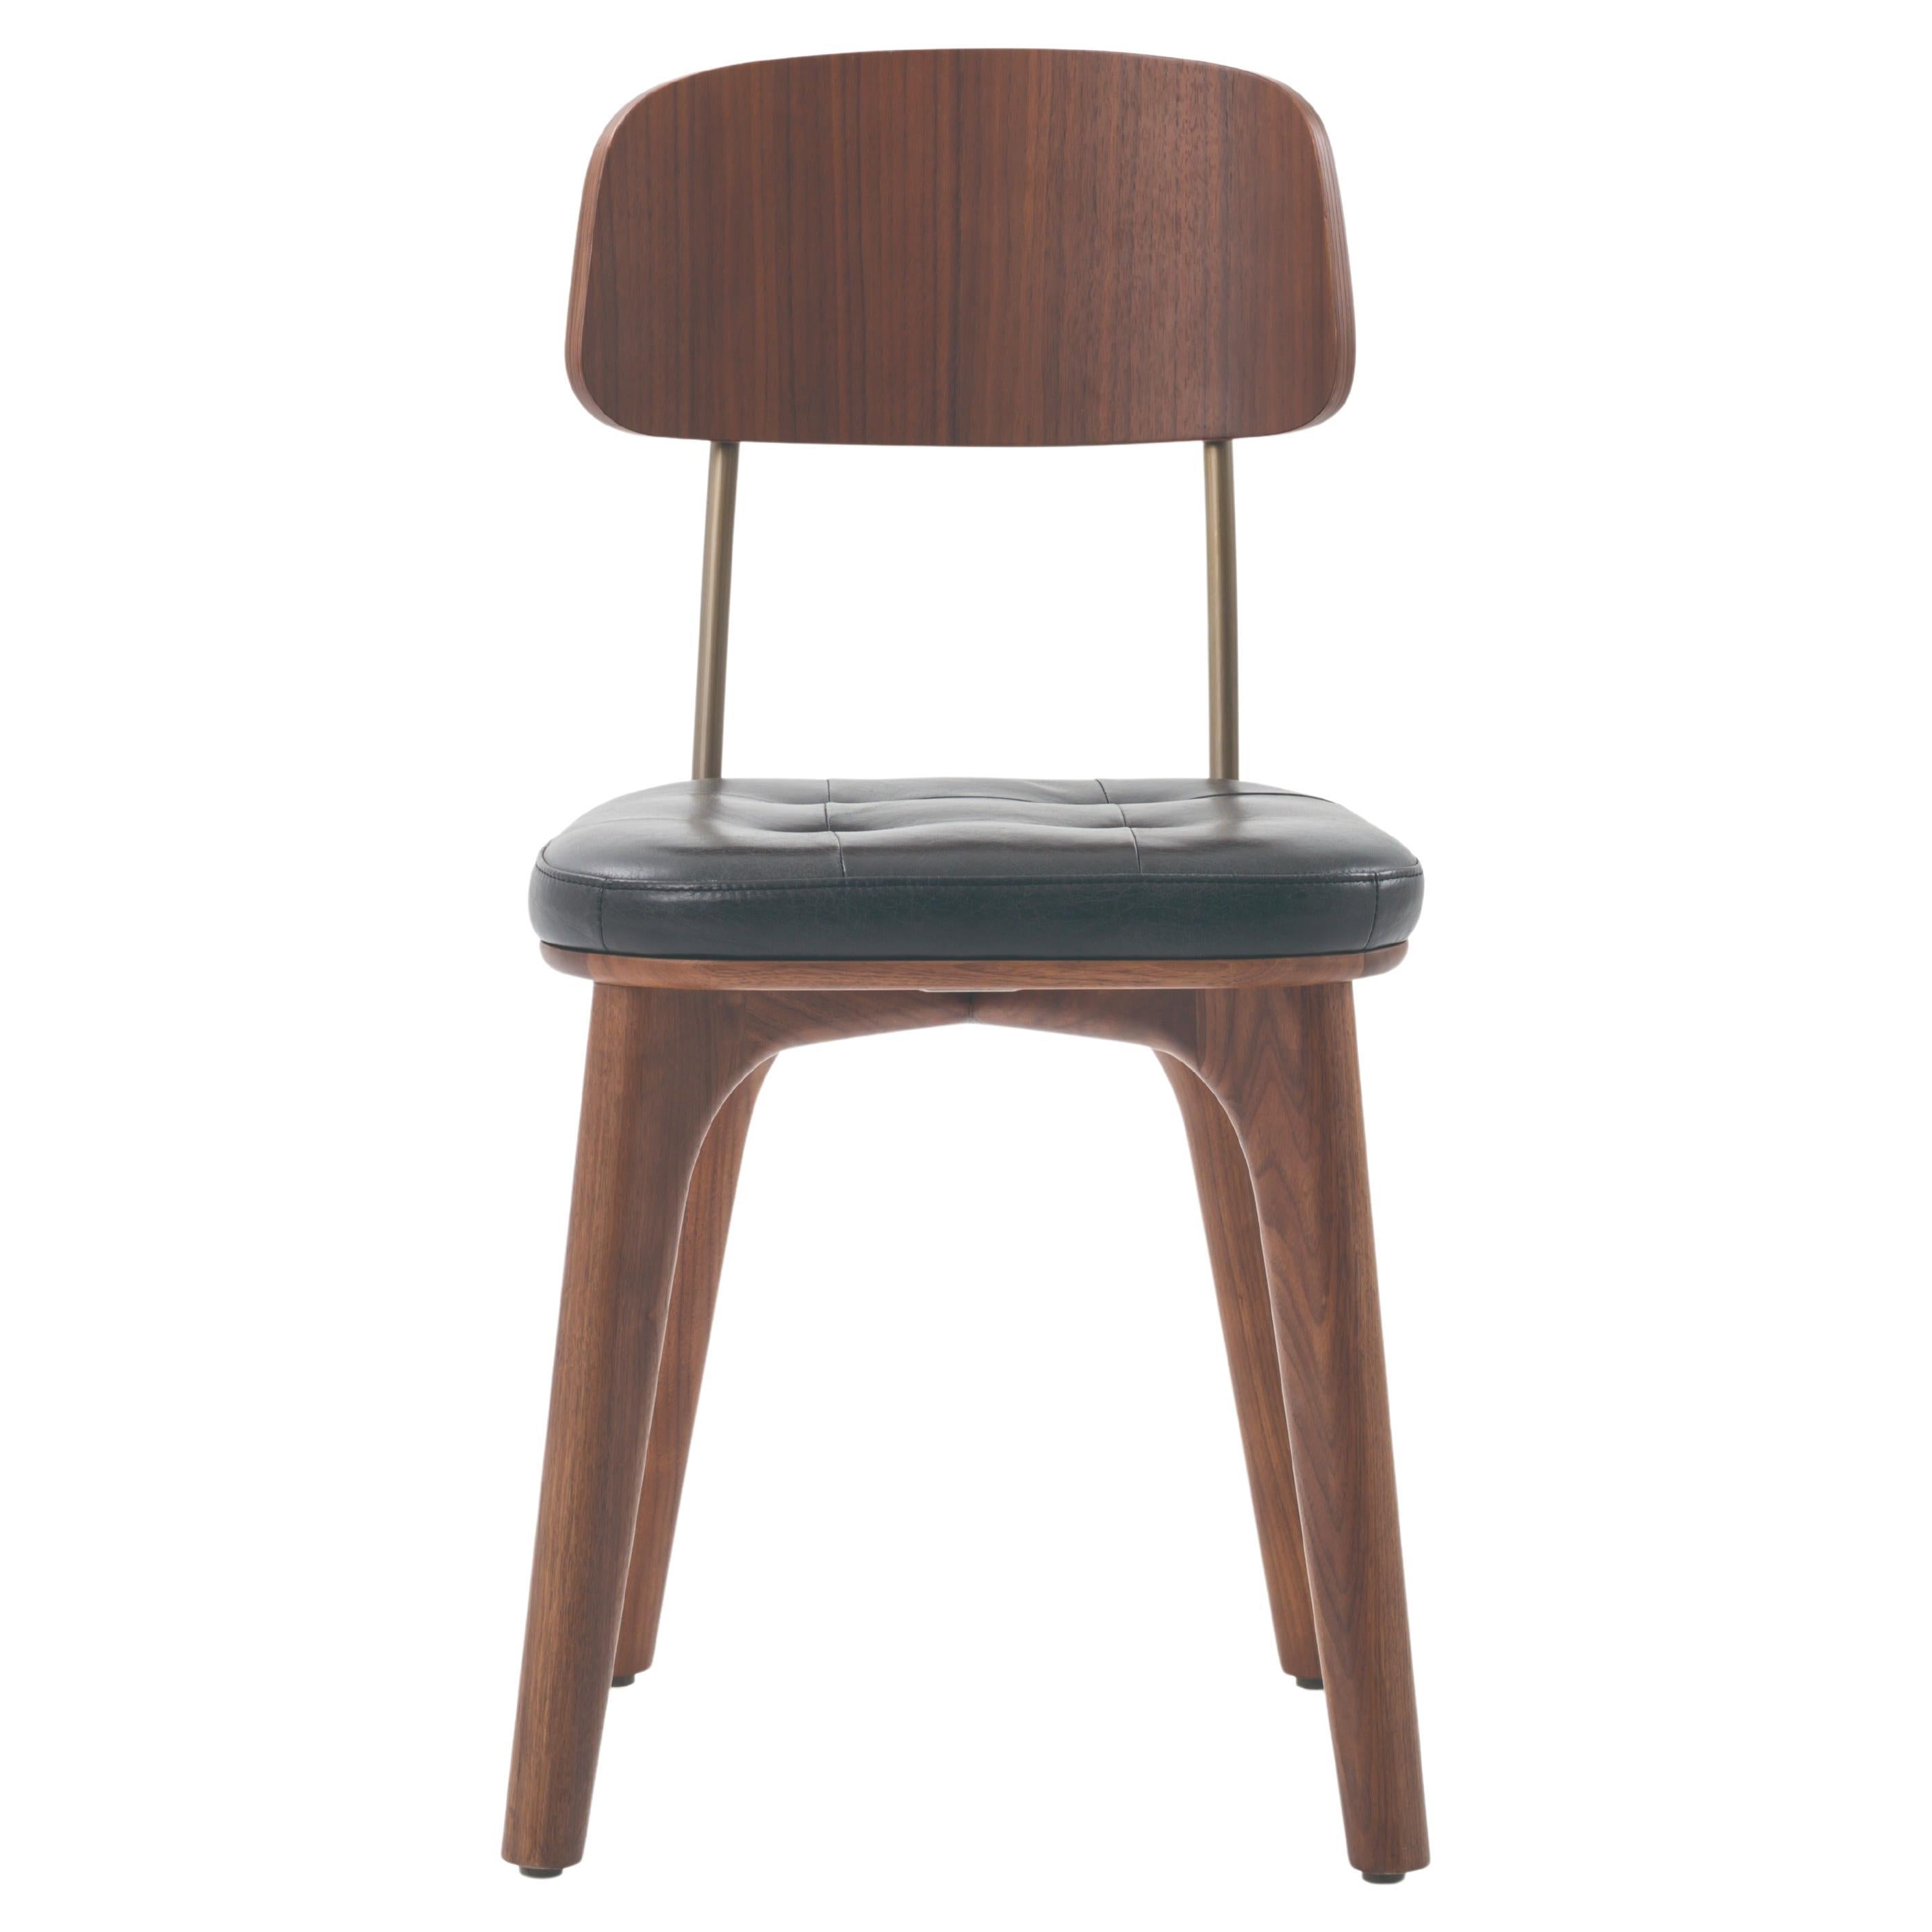 Walnut Stained Ash and Black Caress Leather Chair, Utility V